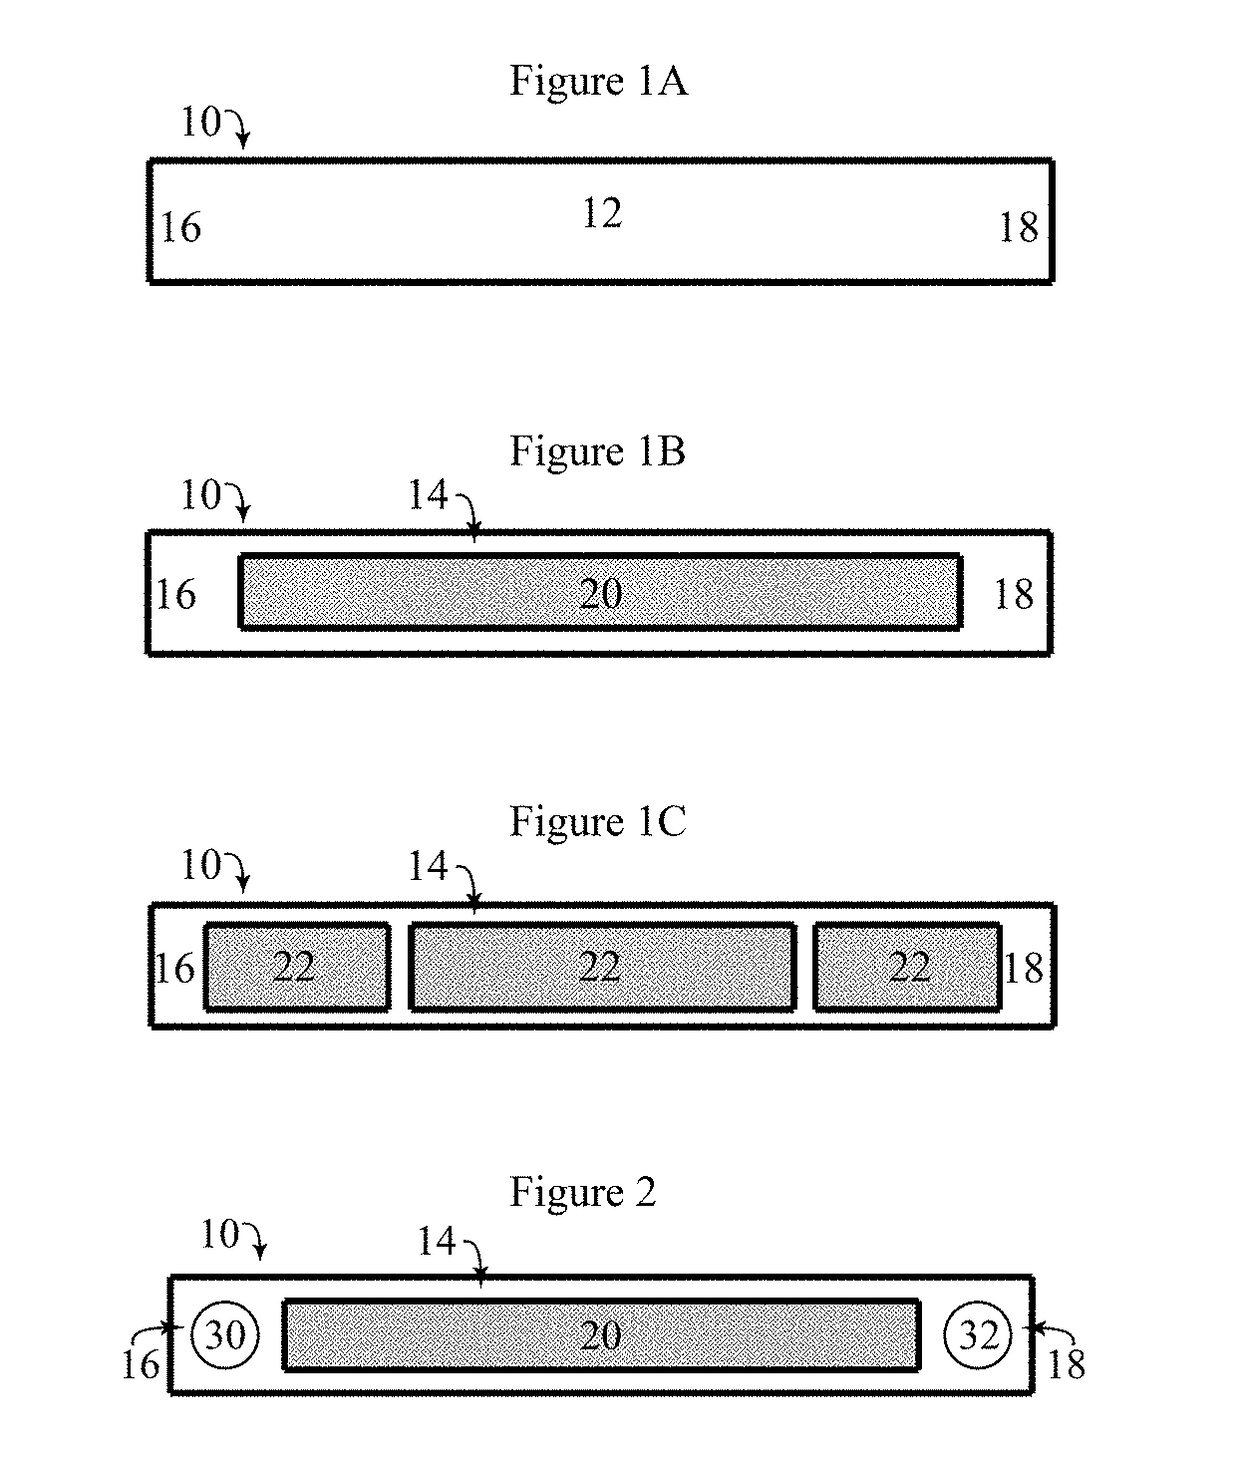 Headbands and methods for securing headbands and hair